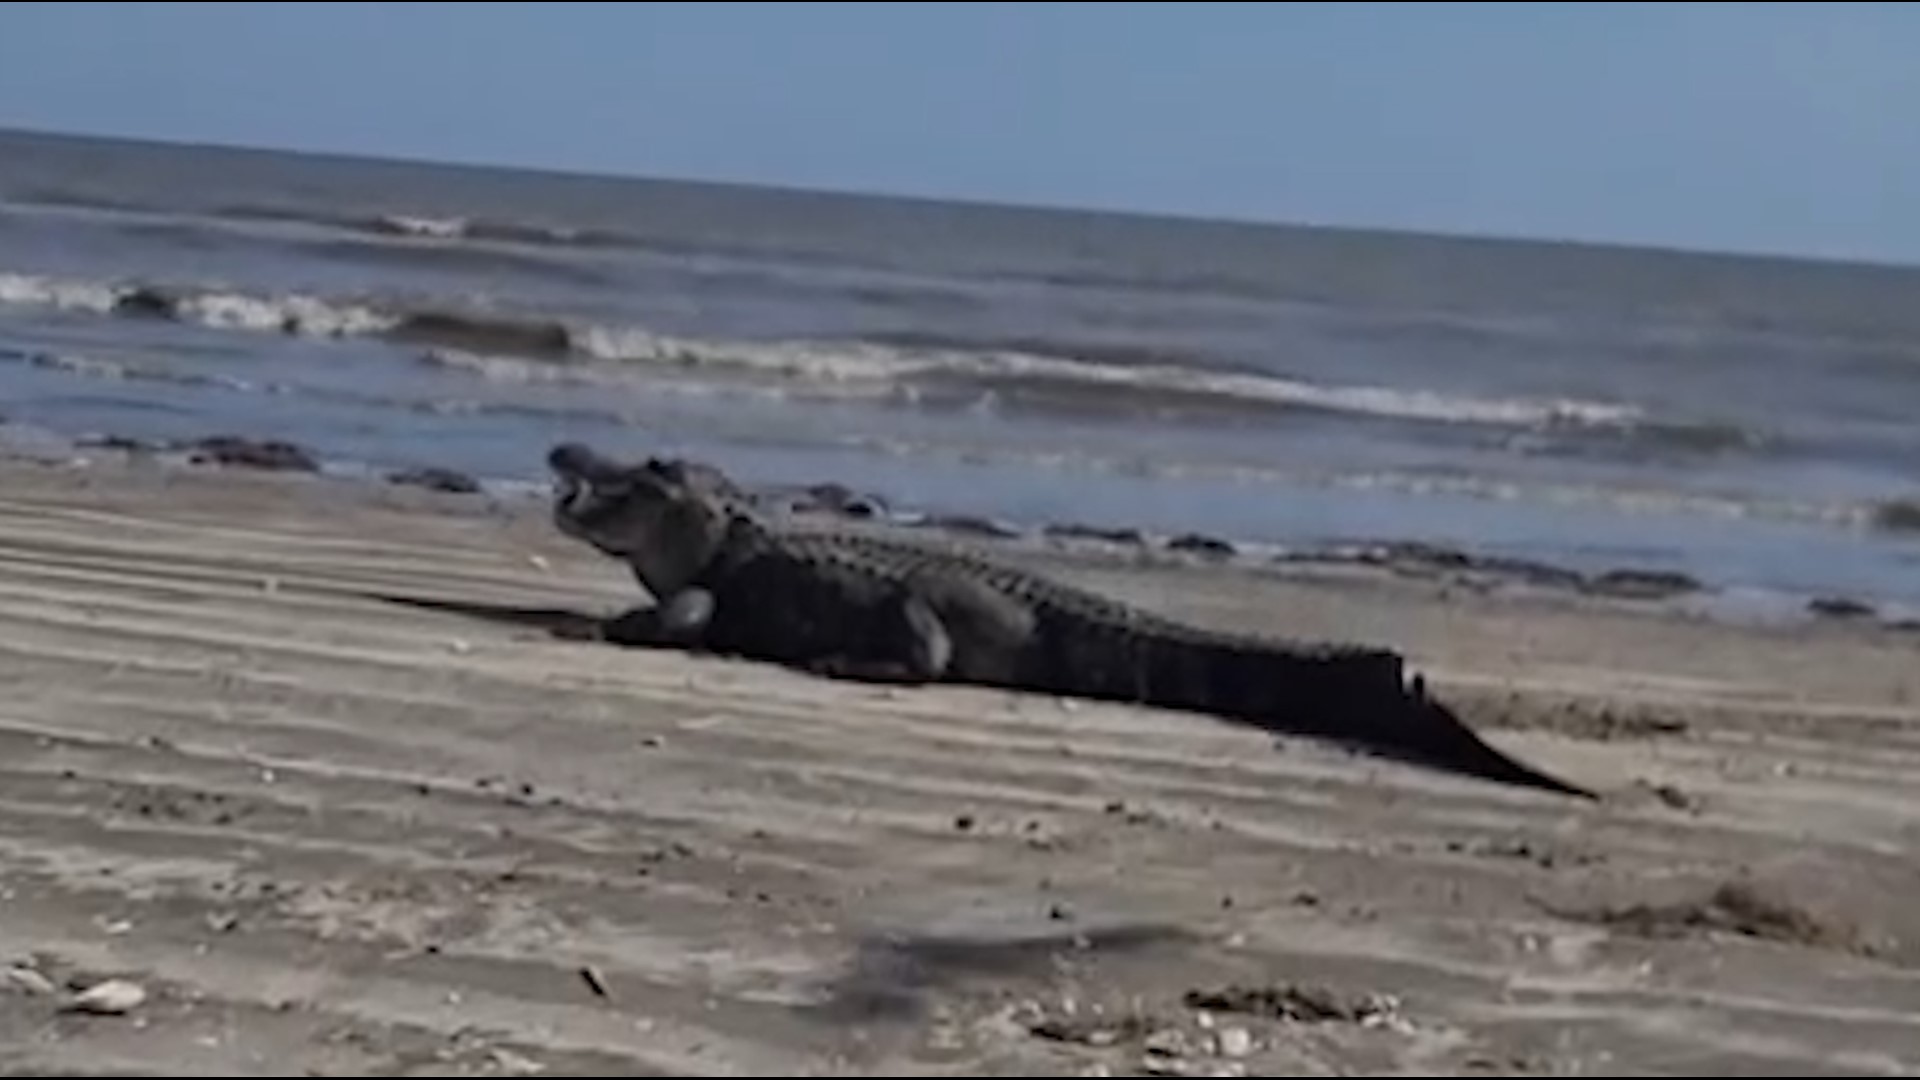 You don't expect to see alligators when you go to the beach in Southeast Texas, but one family was greeted by a monster when they went last week.